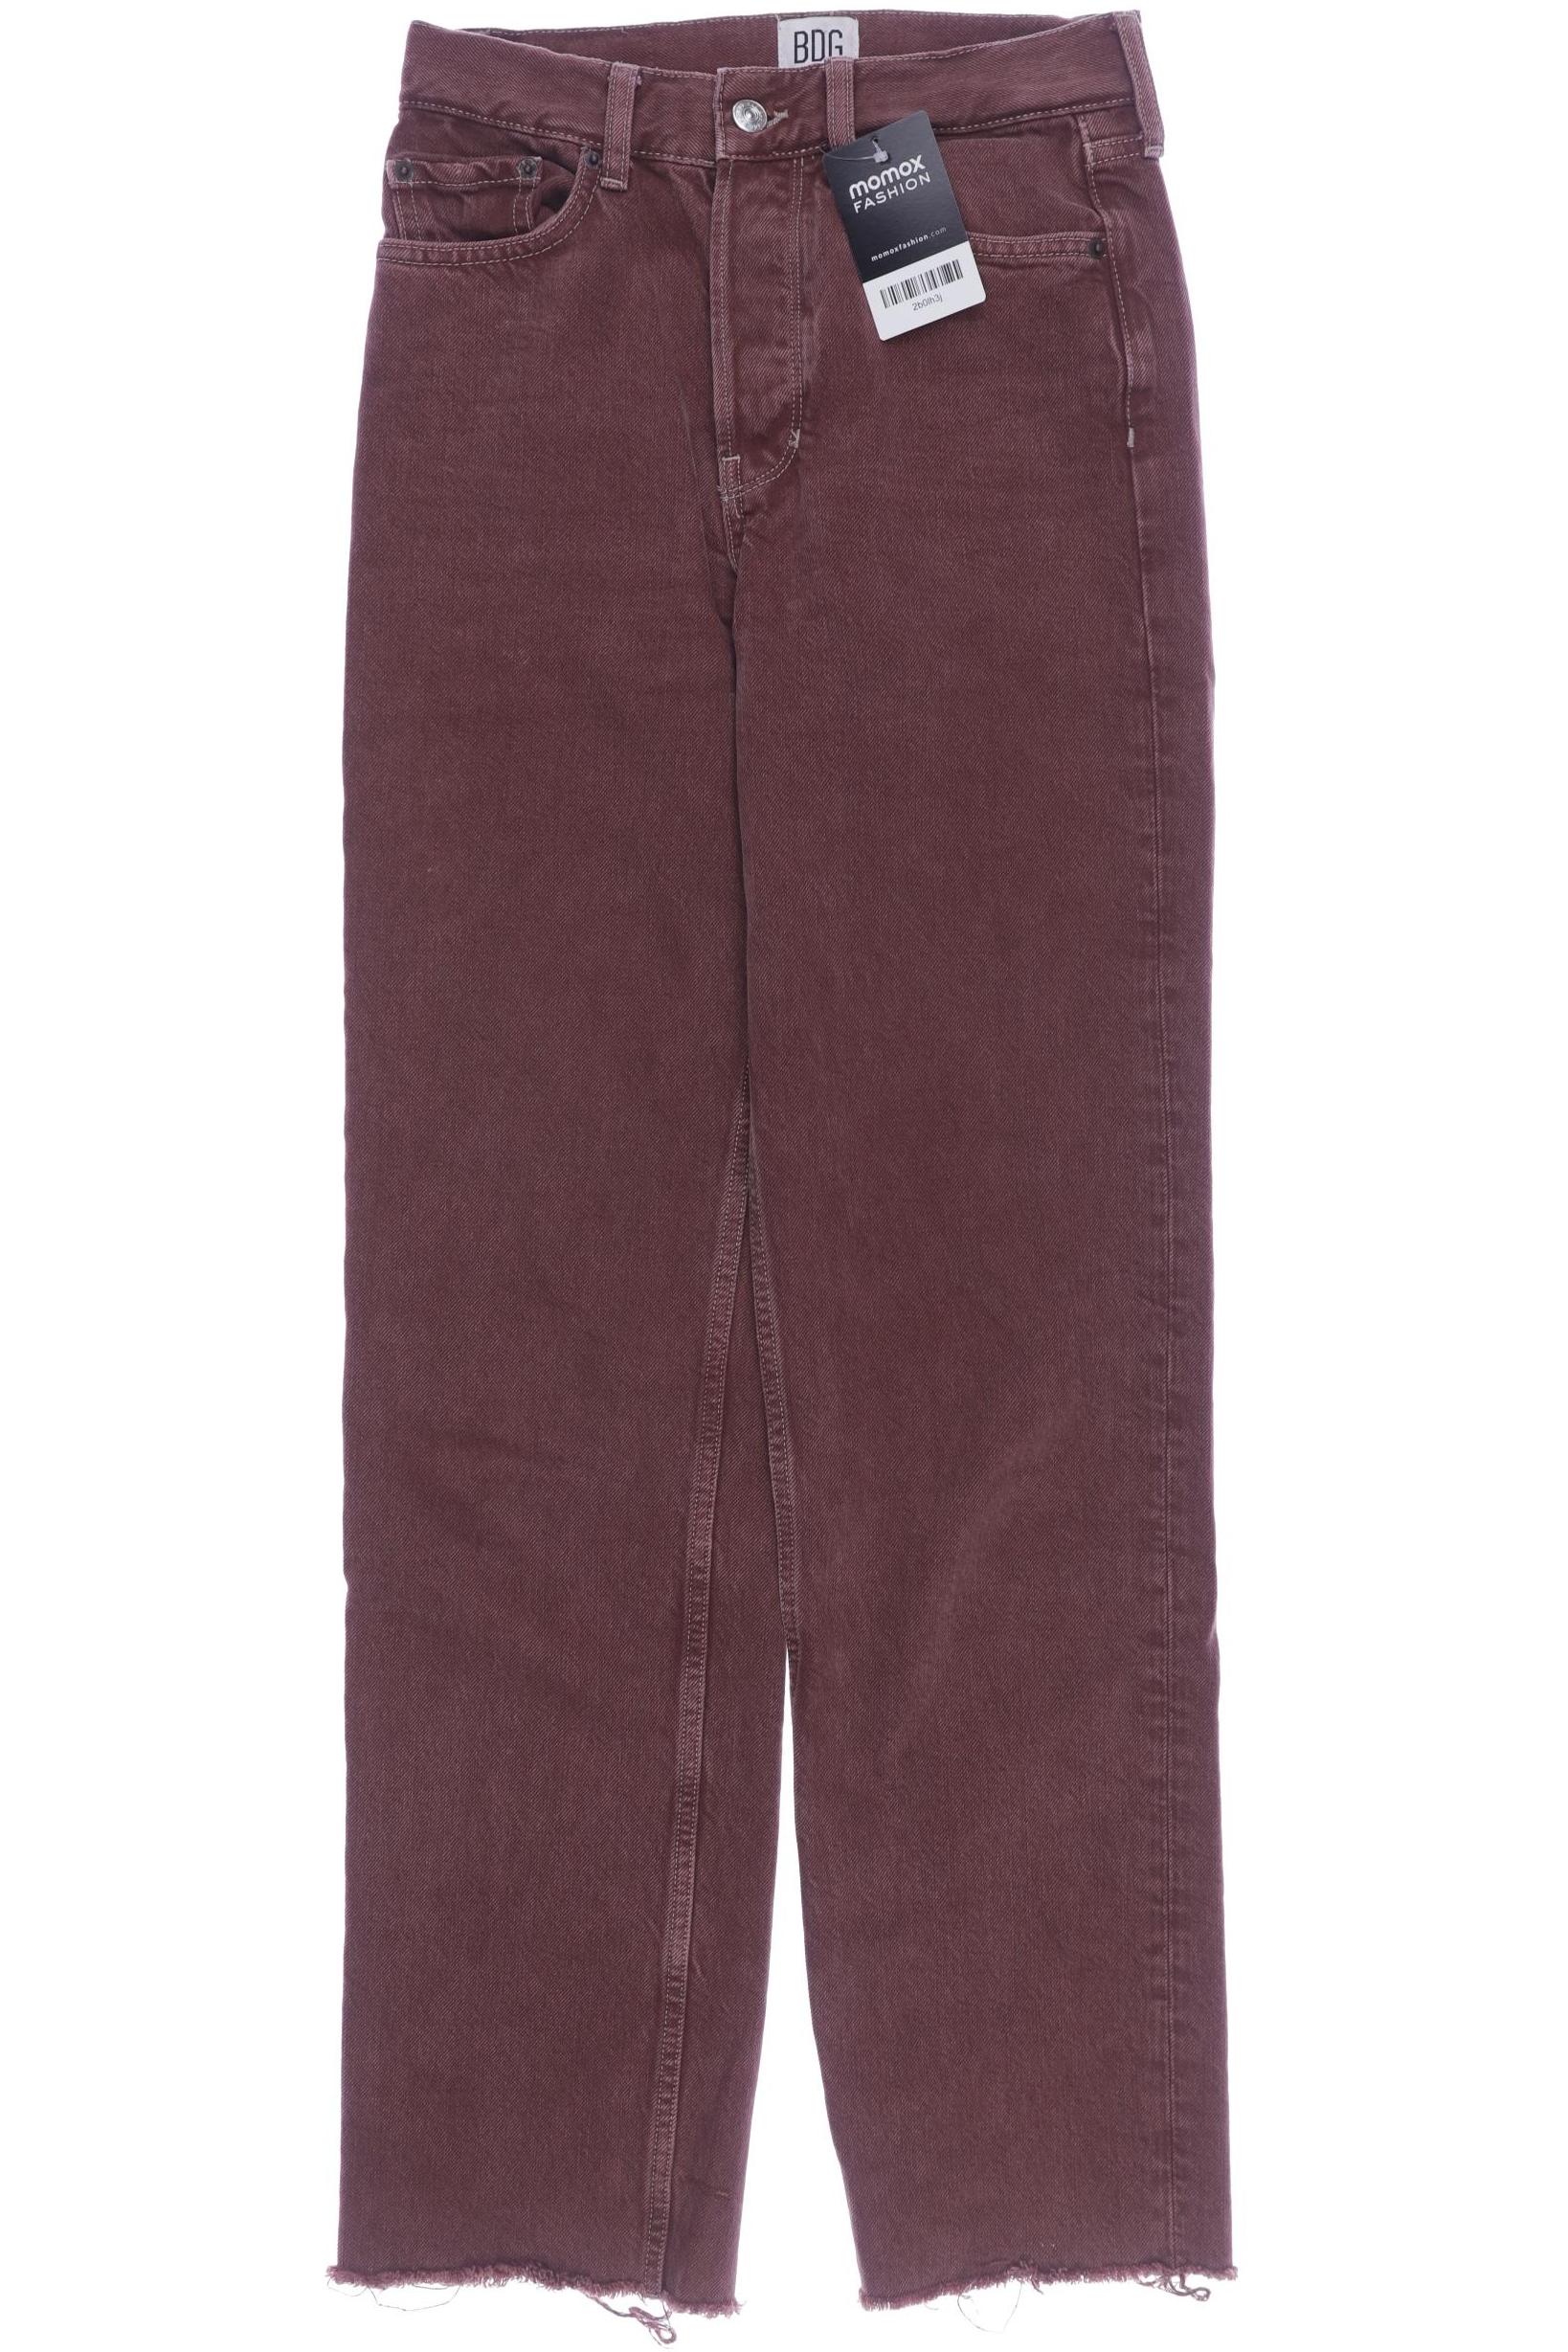 Urban Outfitters Damen Jeans, pink von Urban Outfitters